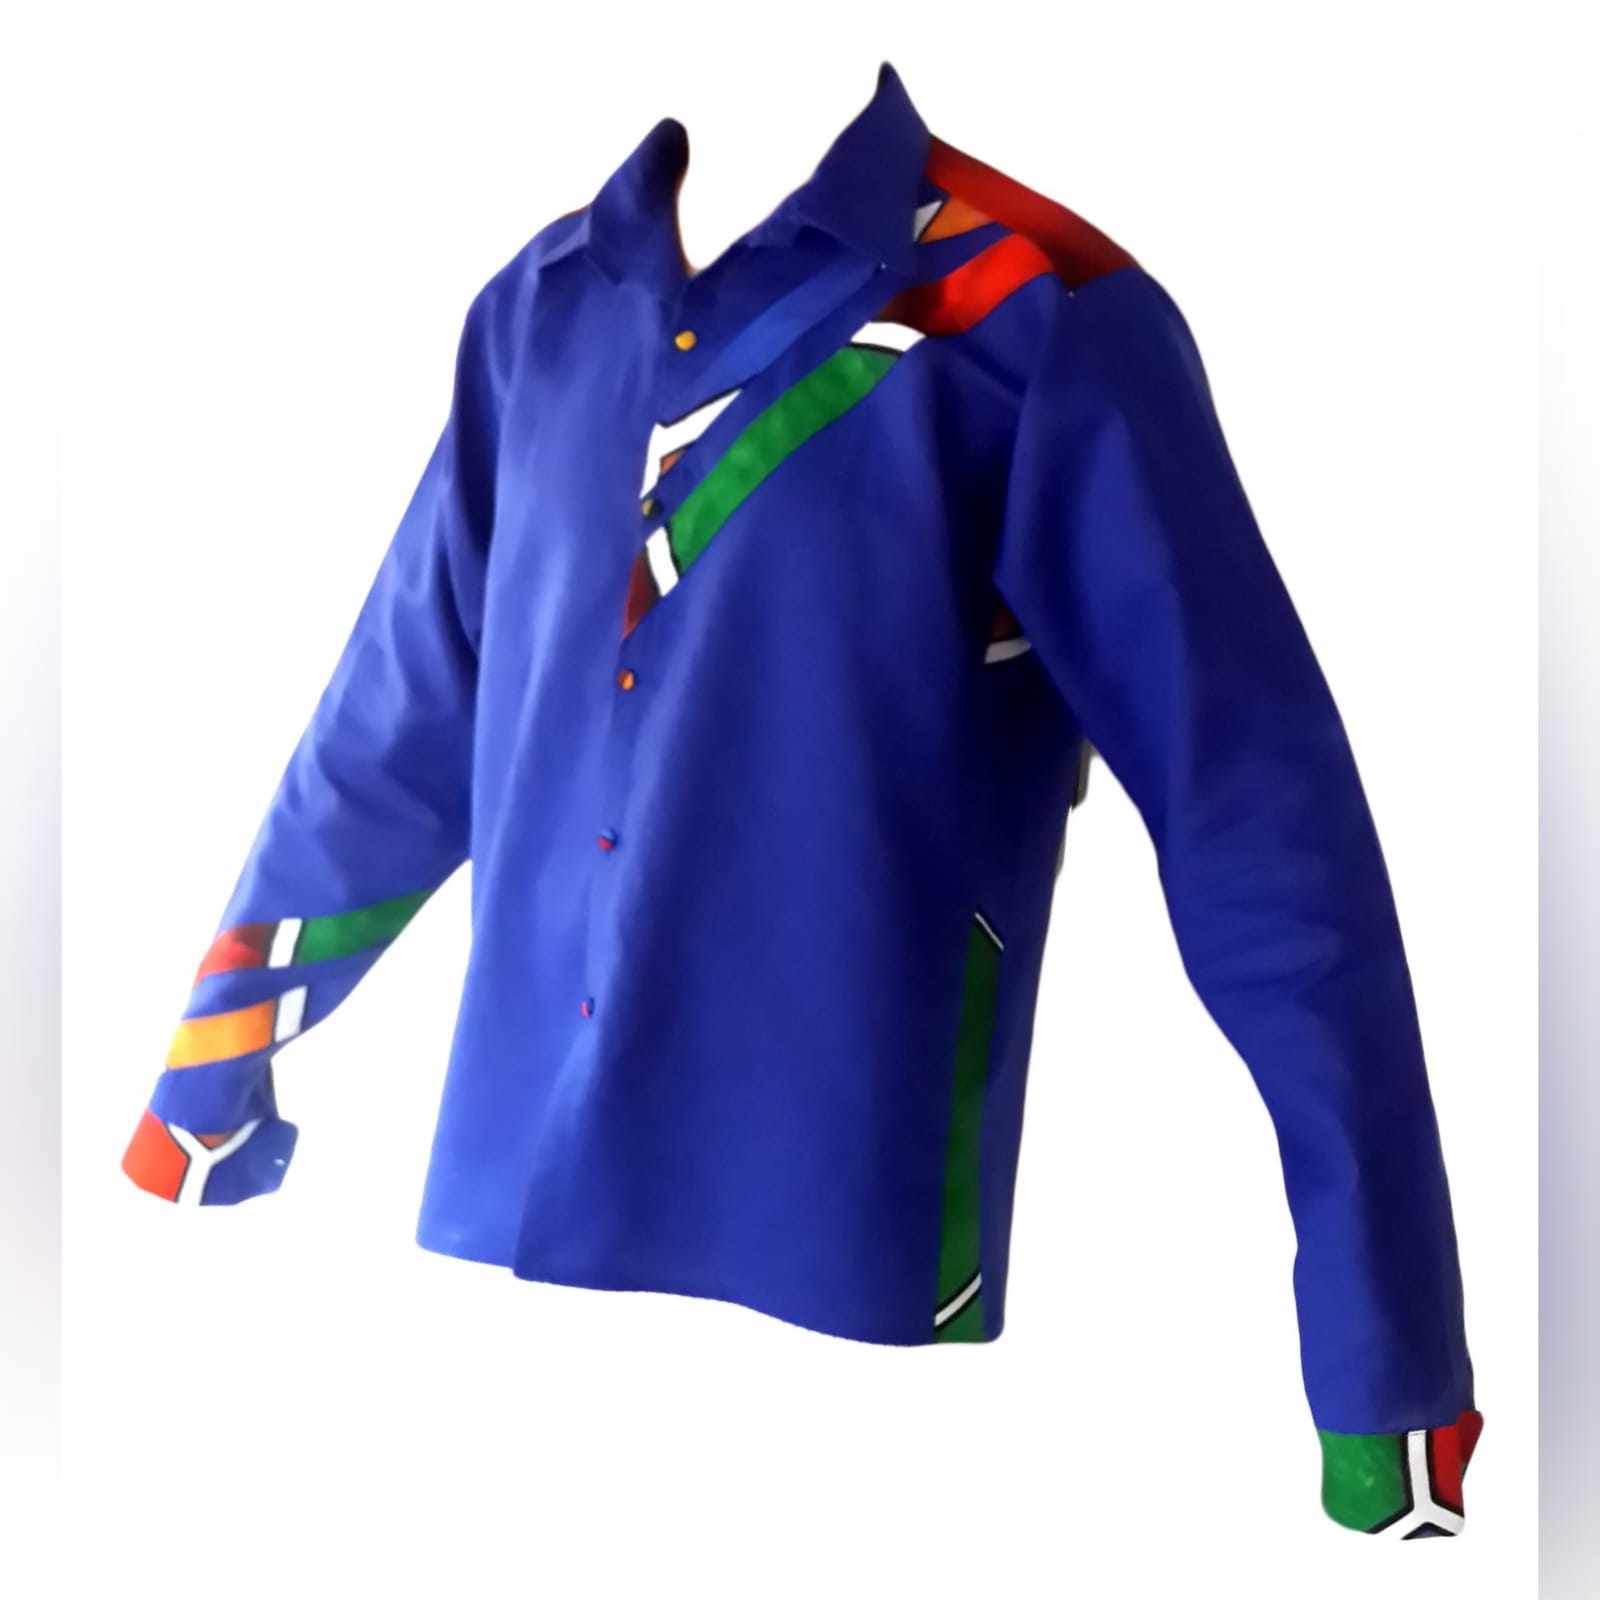 Royal blue ndebele dress and matching ndebele shirt 3 royal blue and ndebele empire fit dress. Bodice with ndebele print and 3/4 sleeves and an under bust belt. Mens matching ndebele shirt in royal blue. Traditional wedding attire.